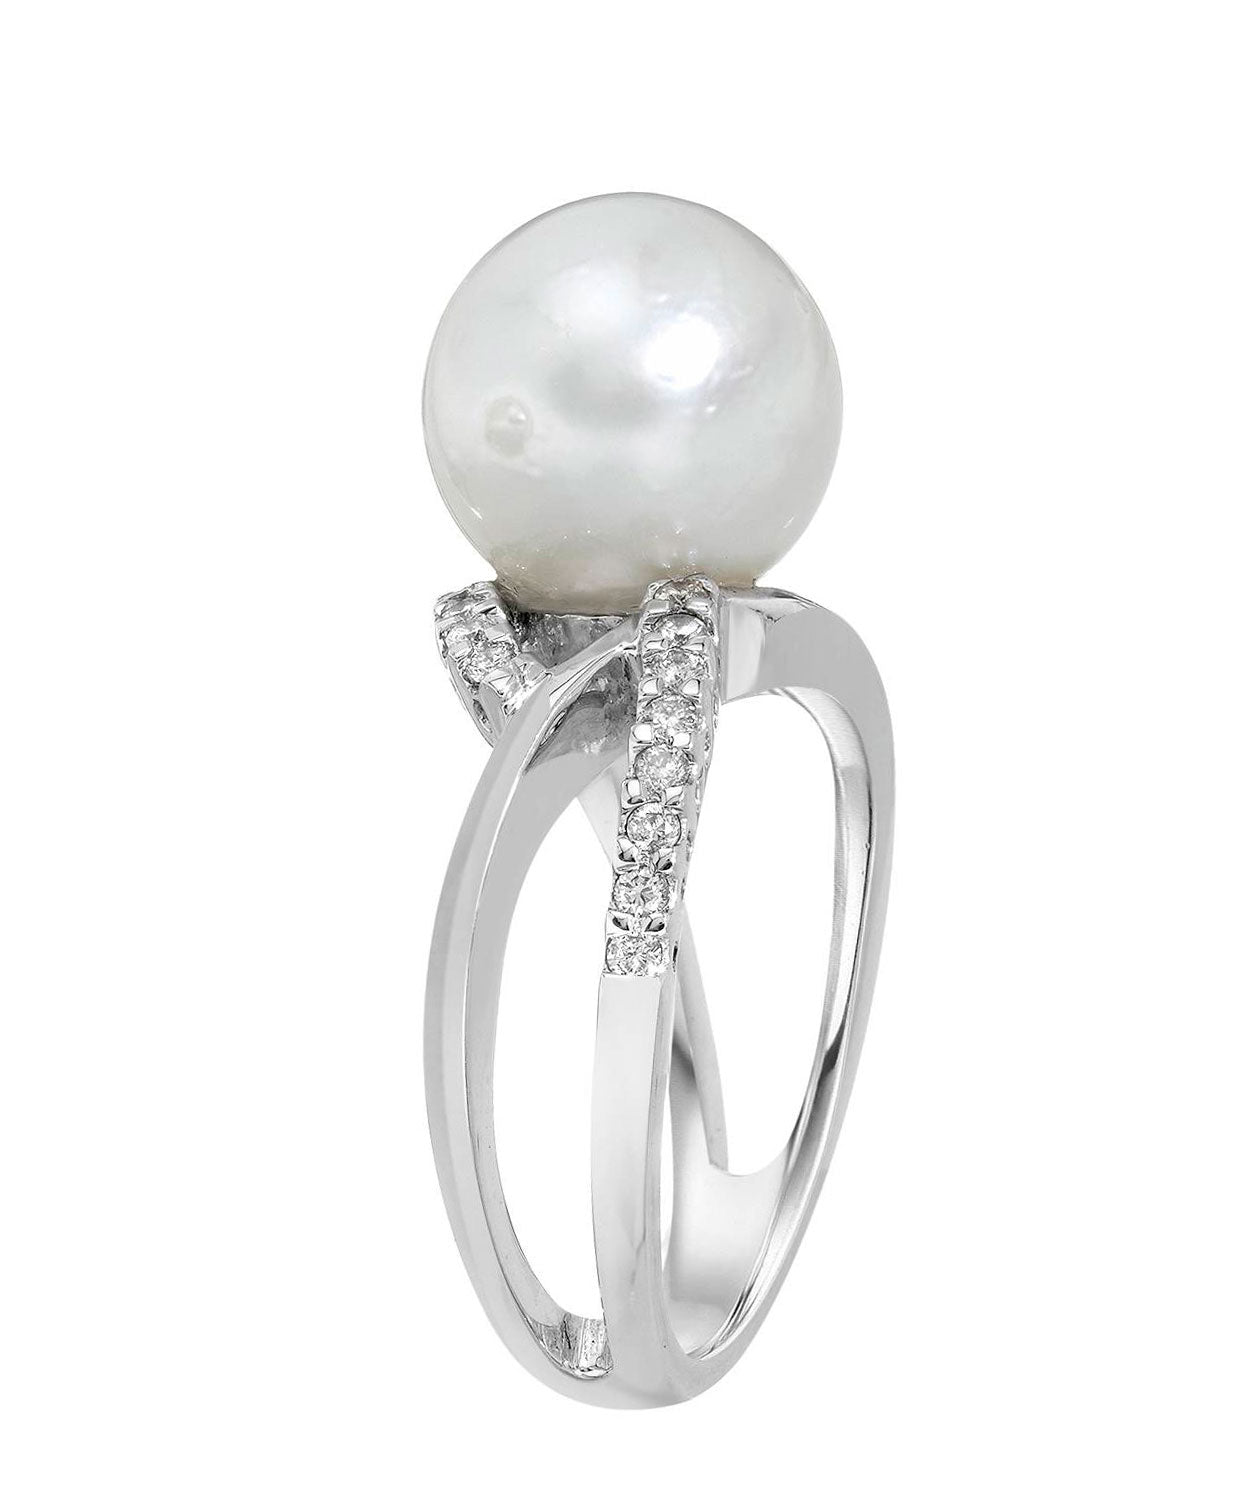 11.5 mm Natural Freshwater Pearl and Diamond 18k White Gold Ring View 2